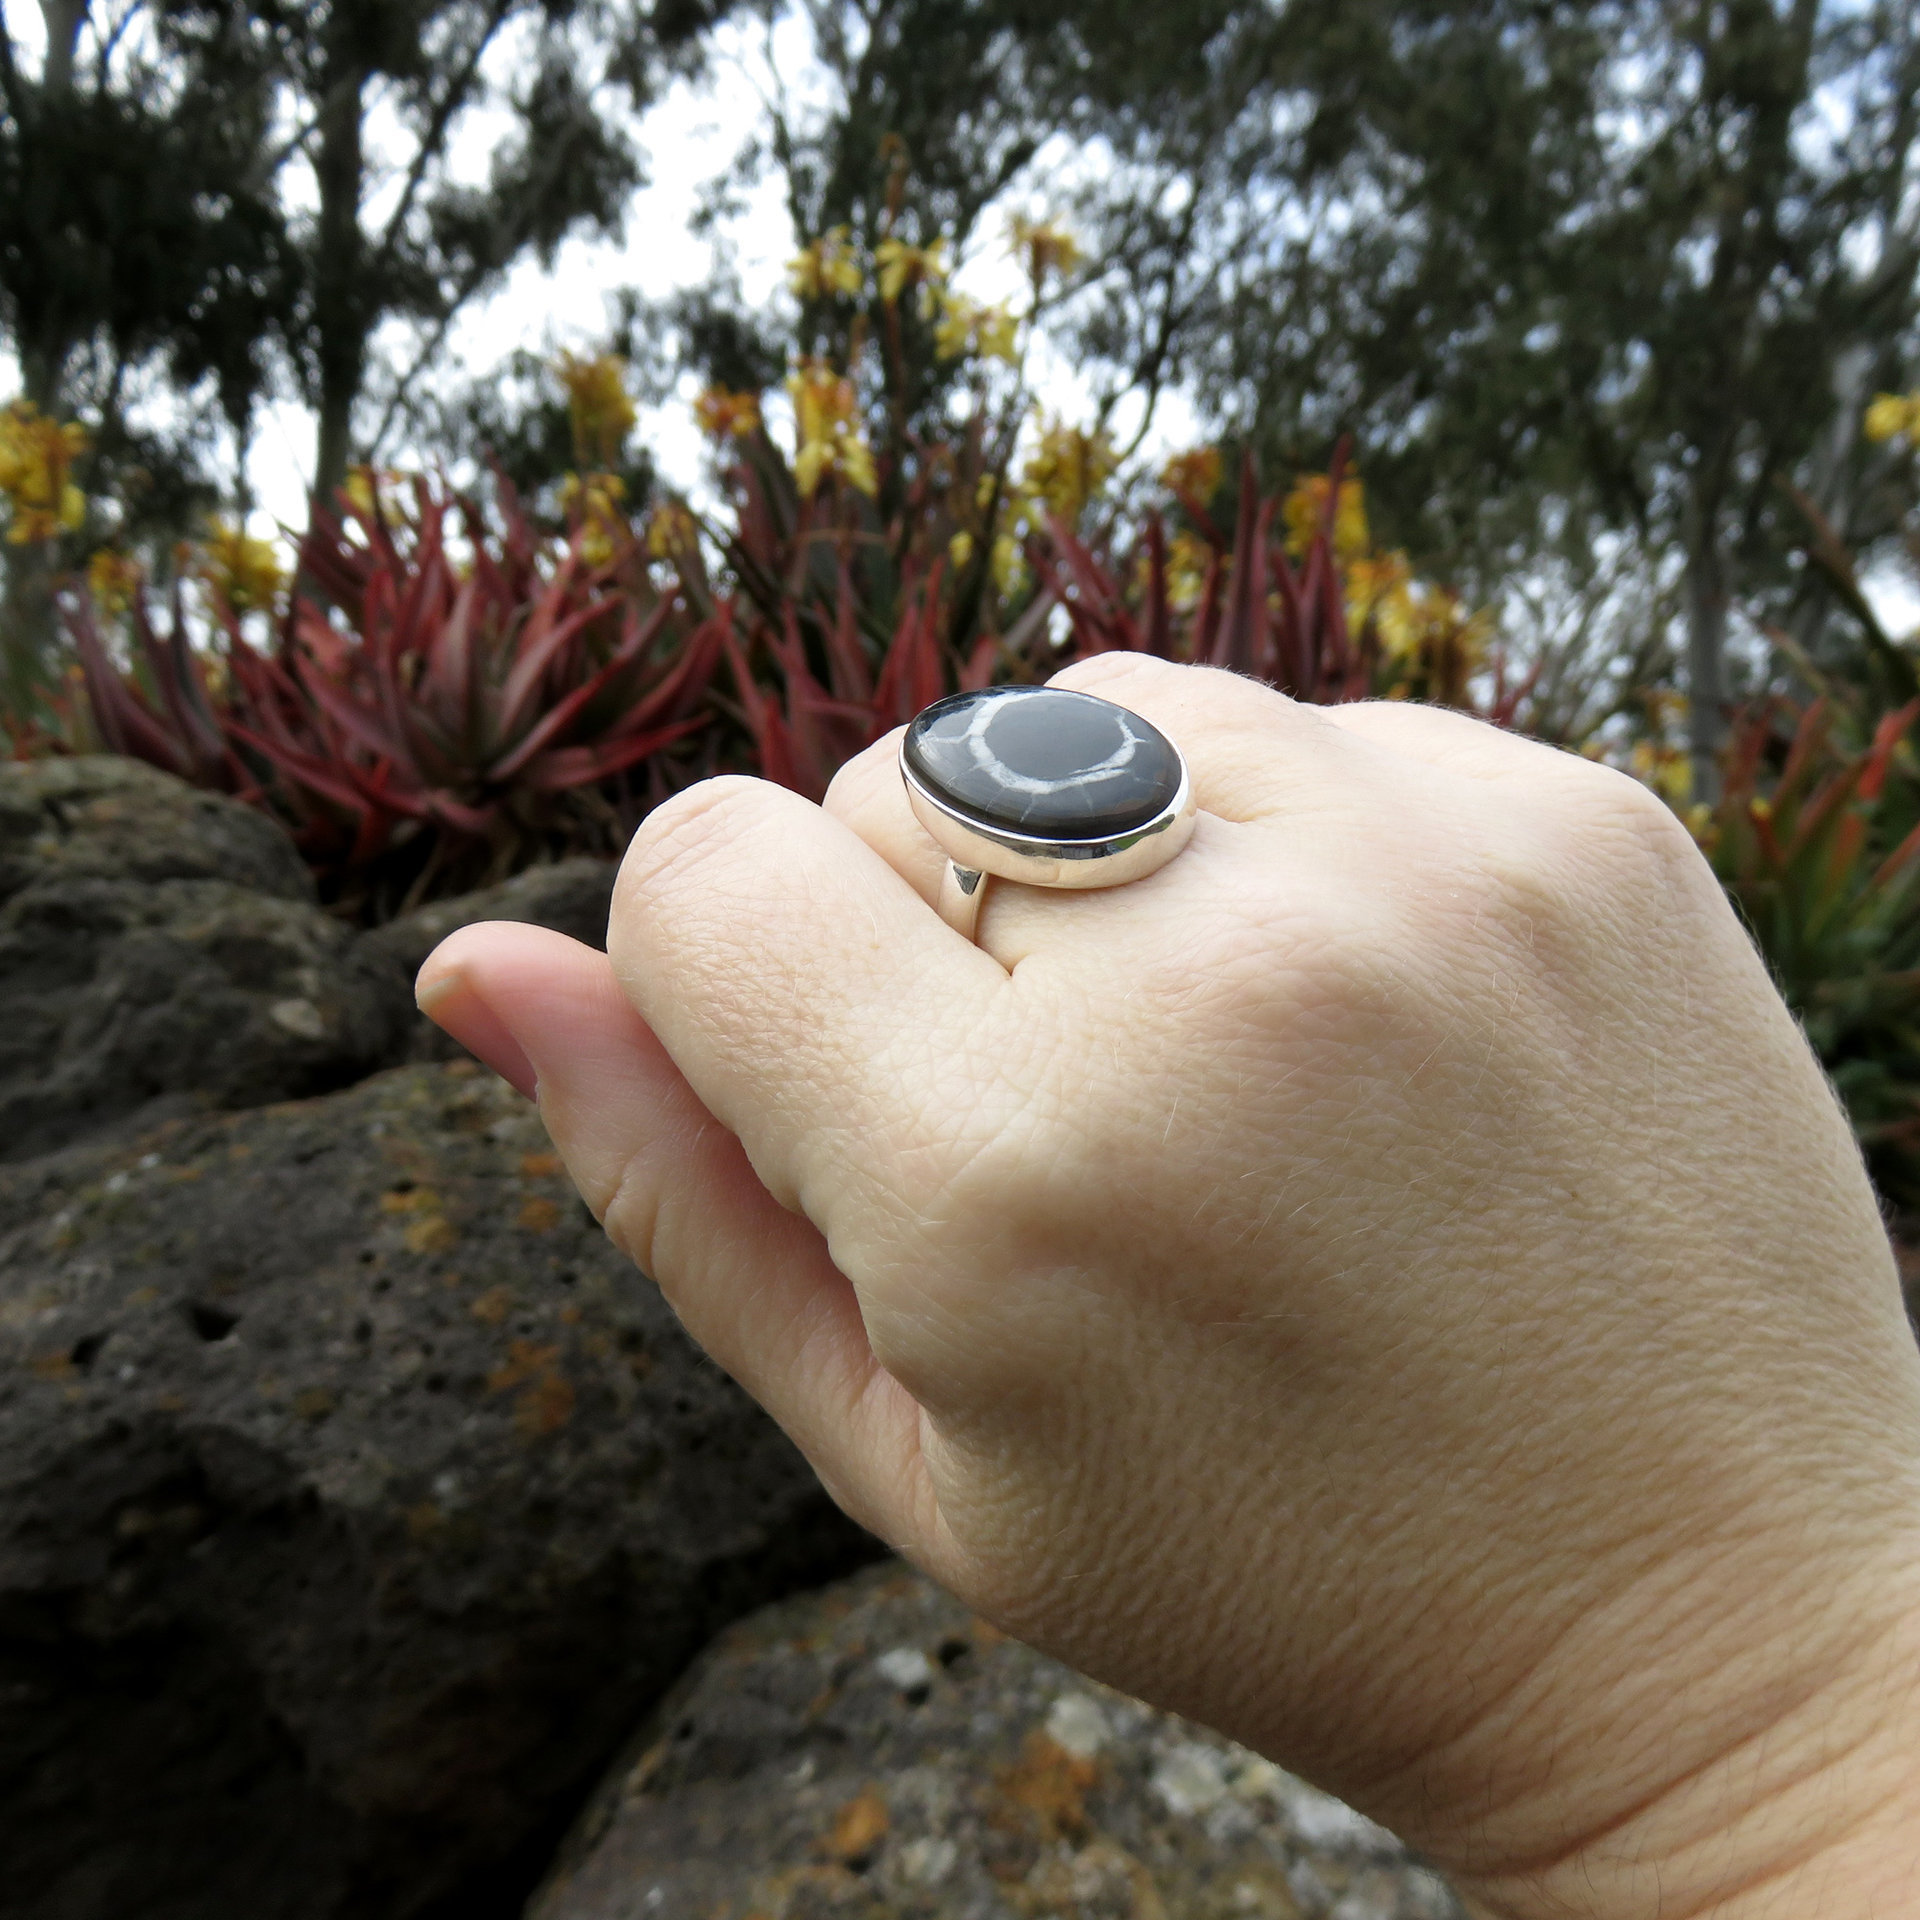 Septarian Ring Size 8.5, Dragonstone Fossil Cabochon, 925 Sterling Silver